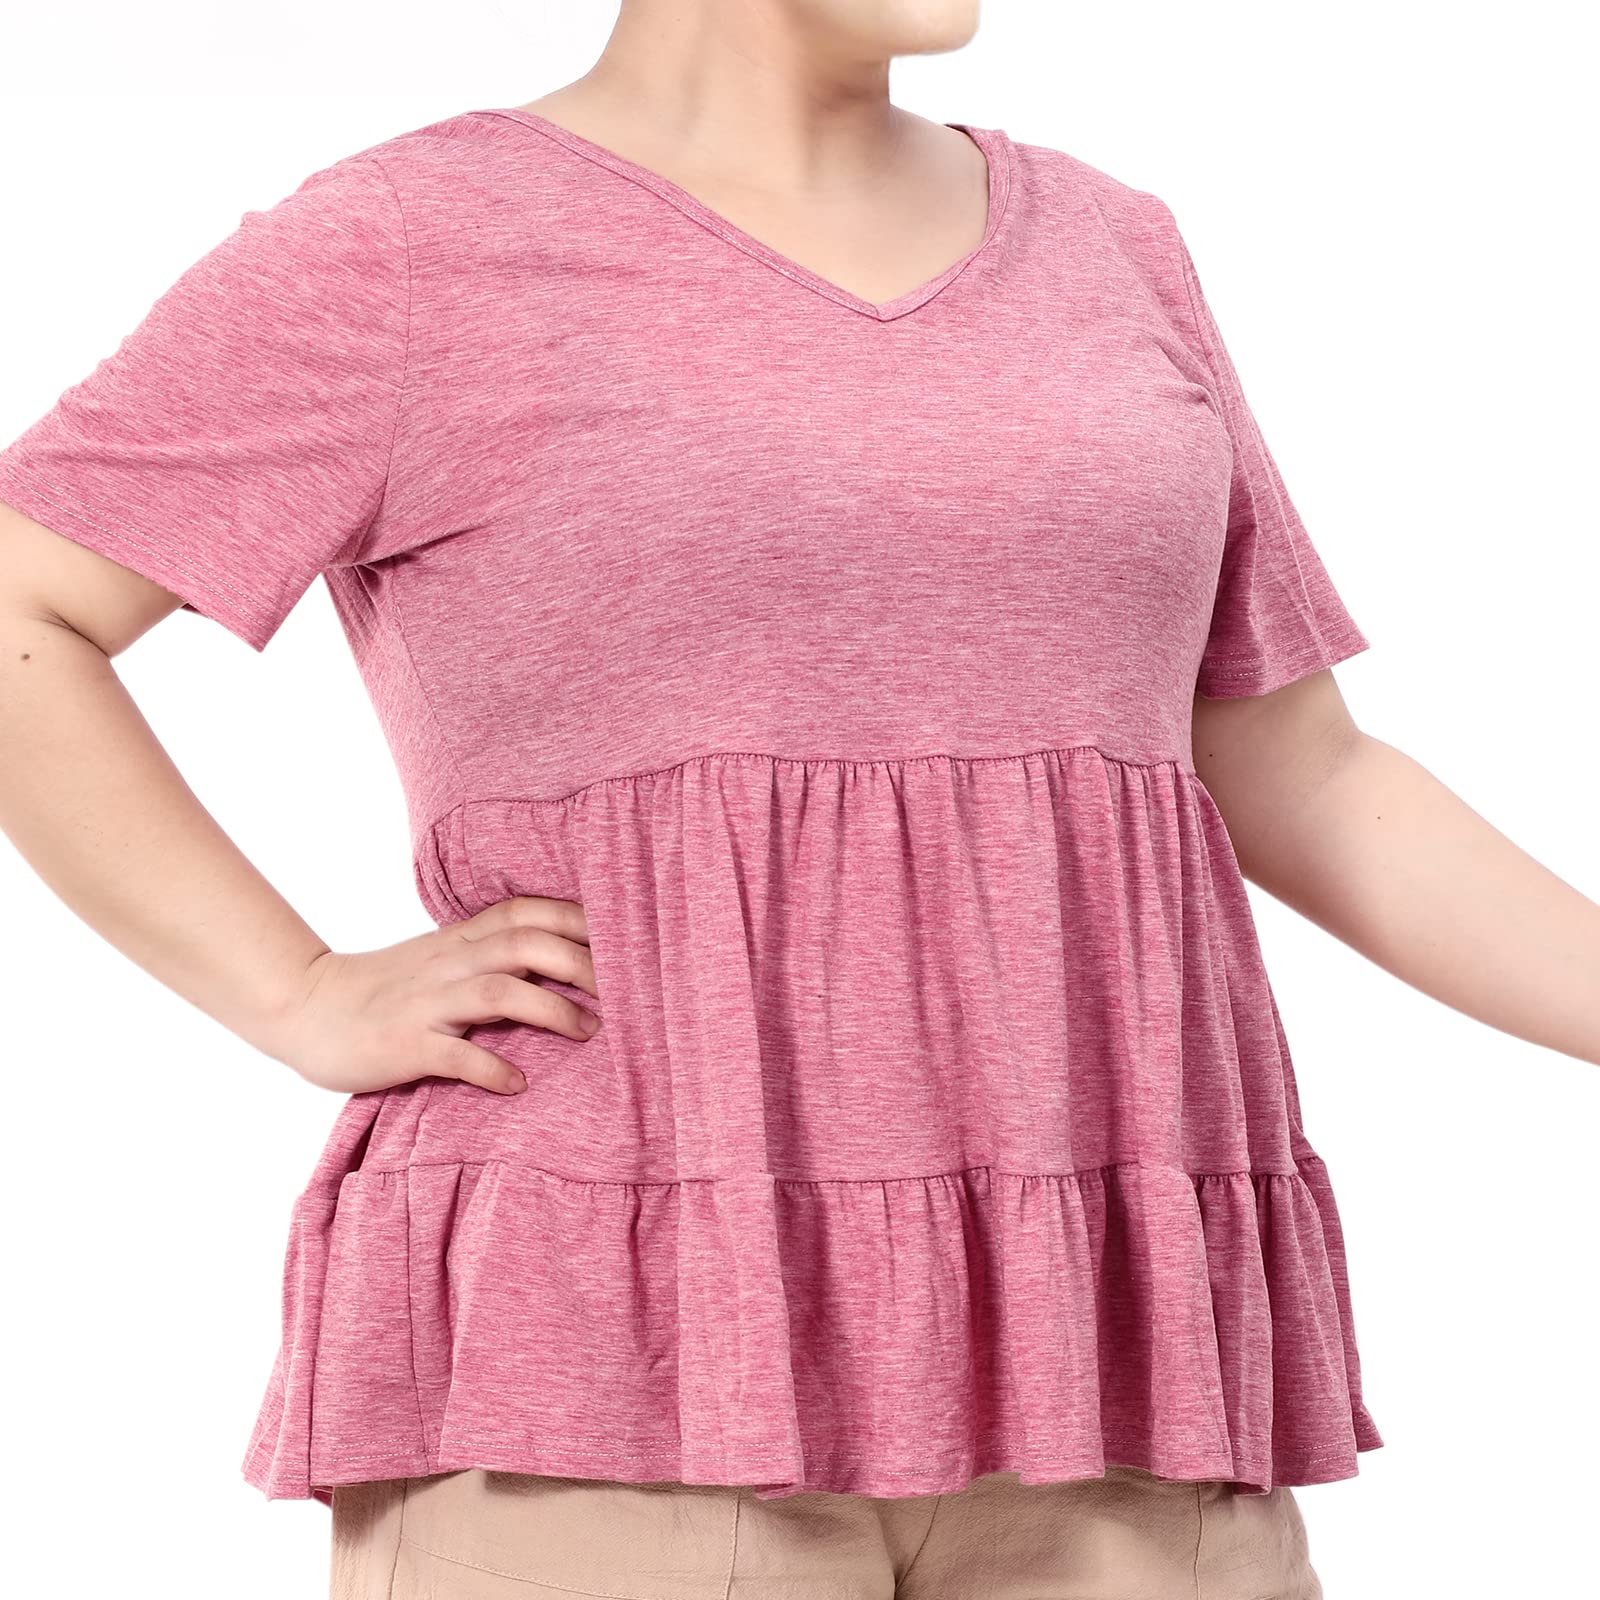 Plus Size Tops V-Neck Shirts Summer Tunic Solid XL-5X-Pink - Moon Wood